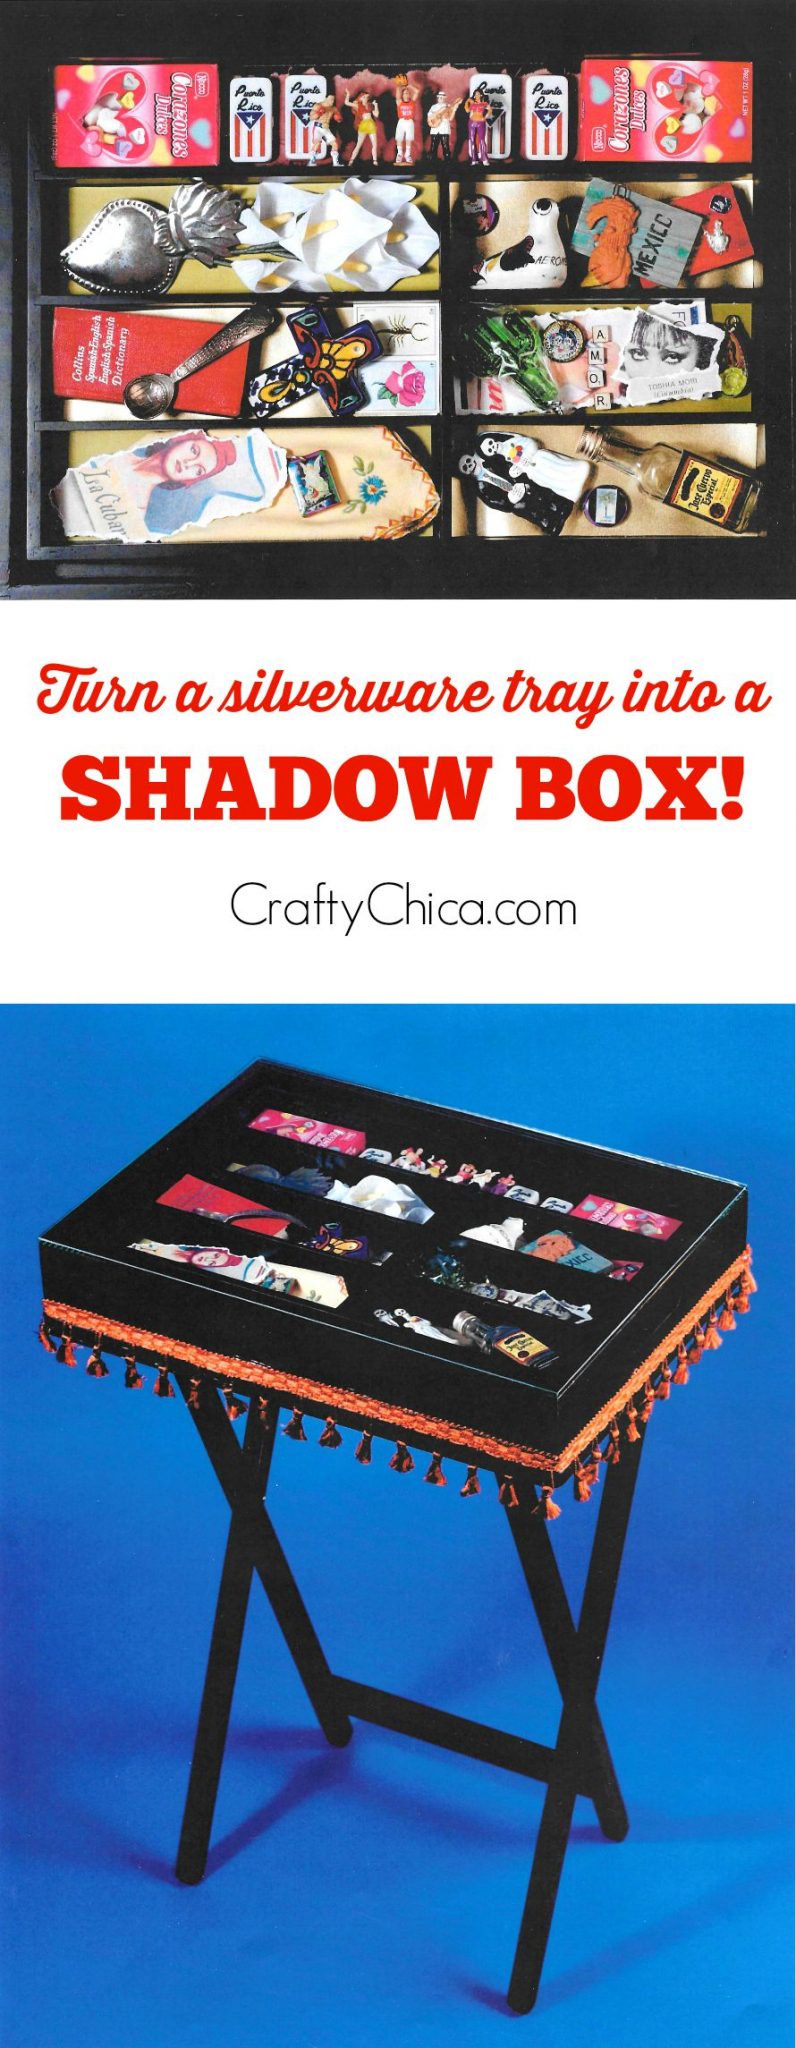 How to make a showbox table from a silverware tray by CraftyChica.com.